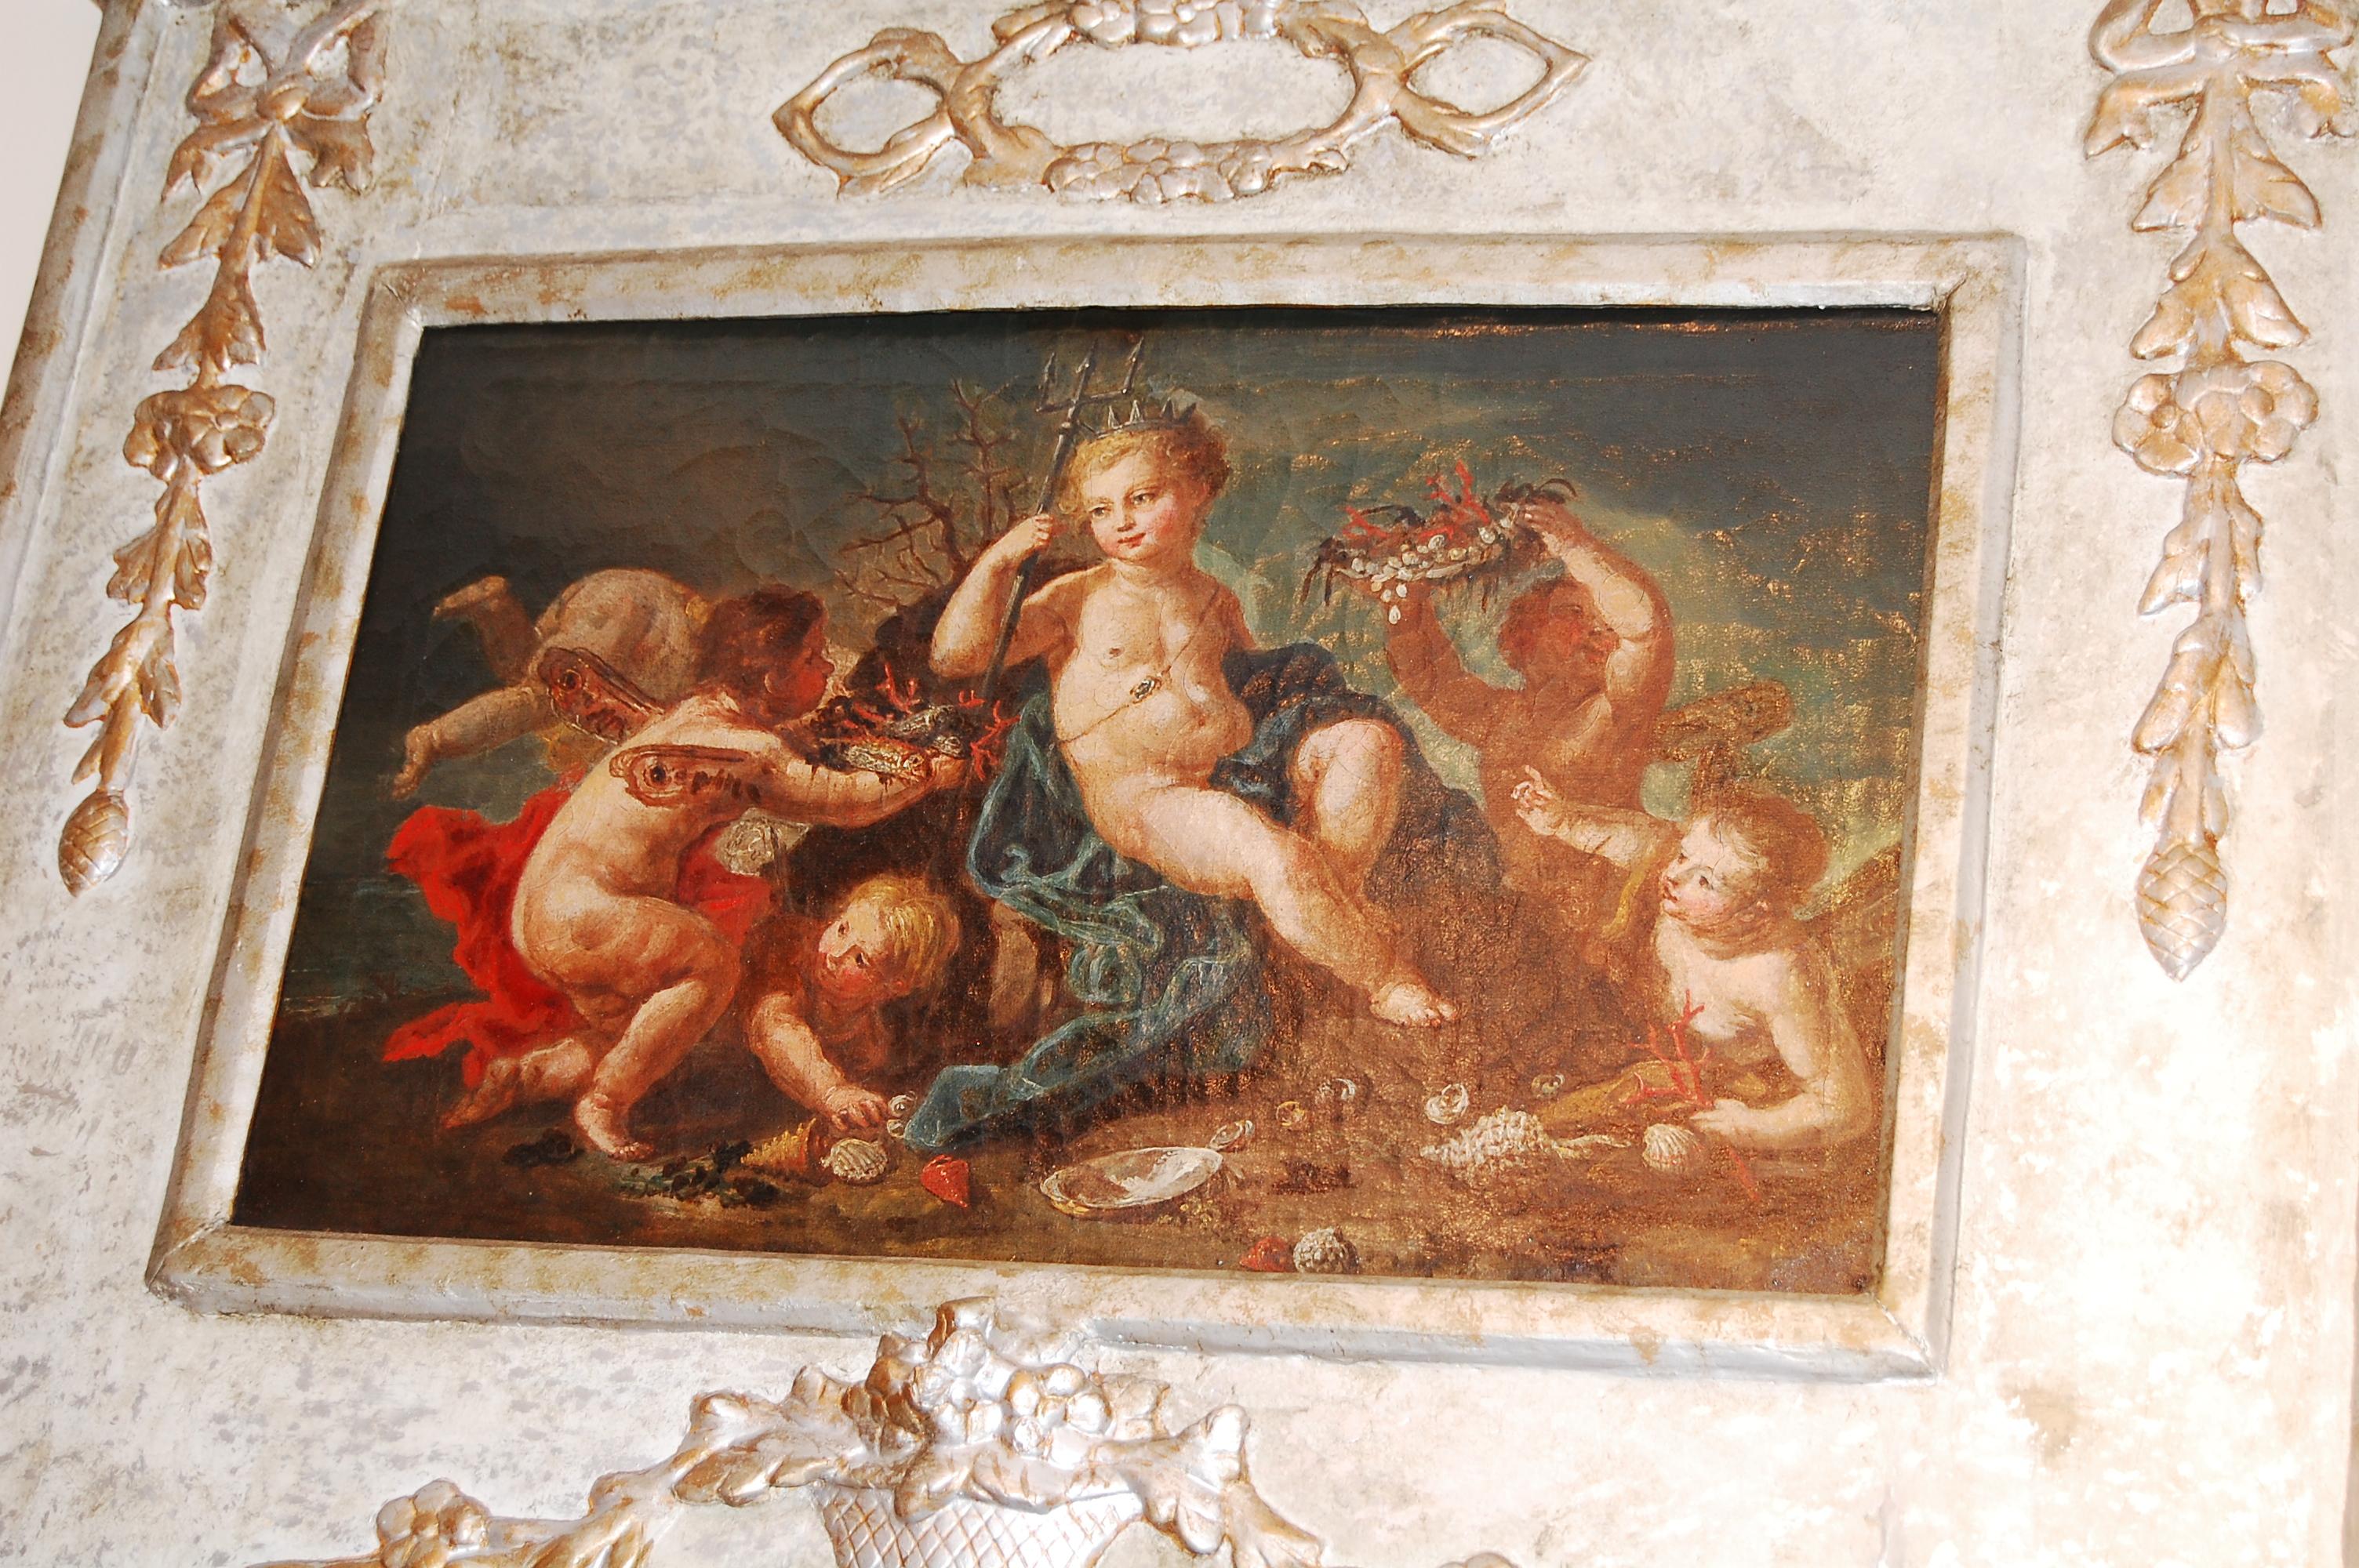 French Louis XVI painted silver gilt trumeau mirror with restored frame bearing low relief basket of flowers and other adornments.  The original oil painting on canvas of putti frolicking relates to the ancient classics.  The mirror is a